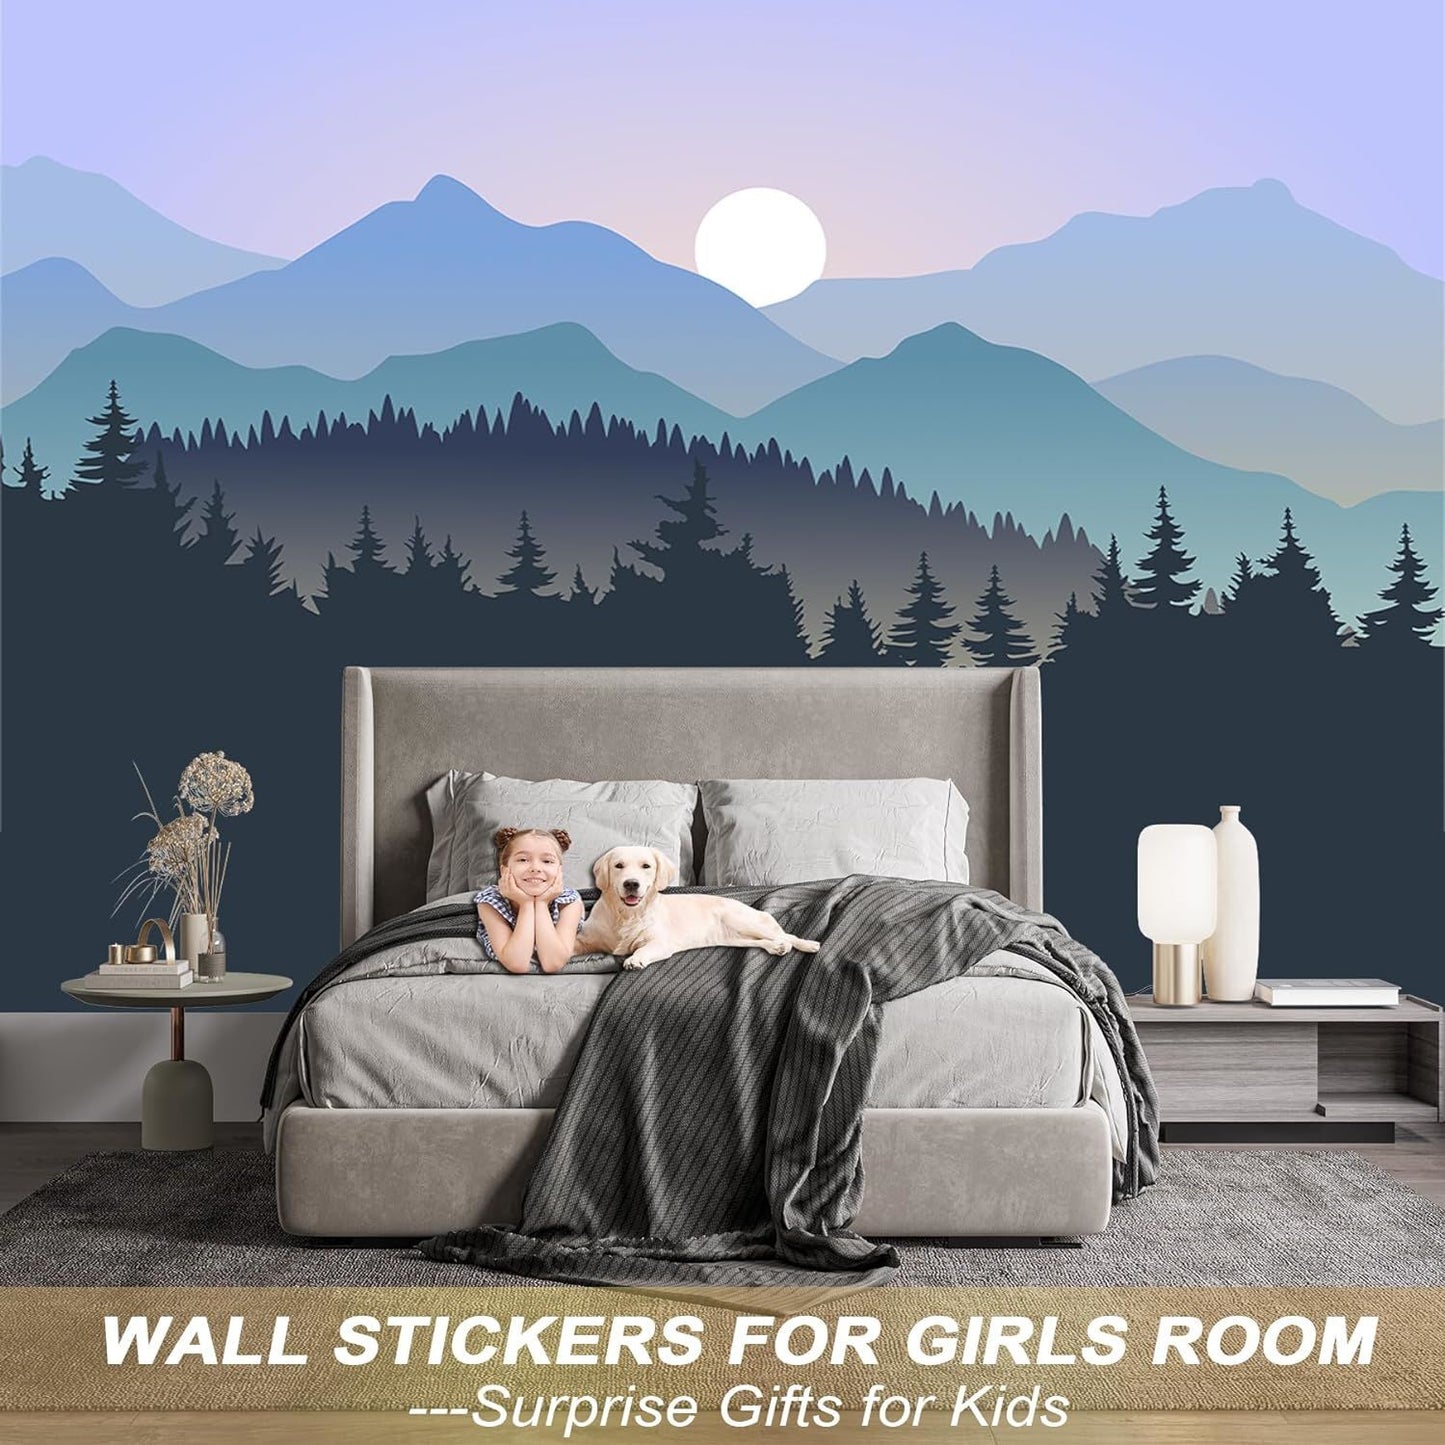 Large Silk Wall Murals, Cloud Wallpaper, 155in(W) x103in(H), Kids Wallpaper, Showcasing Luxury and Elegance, Perfect for Kids' Room, Living Room, and Wallpaper for Bedroom.